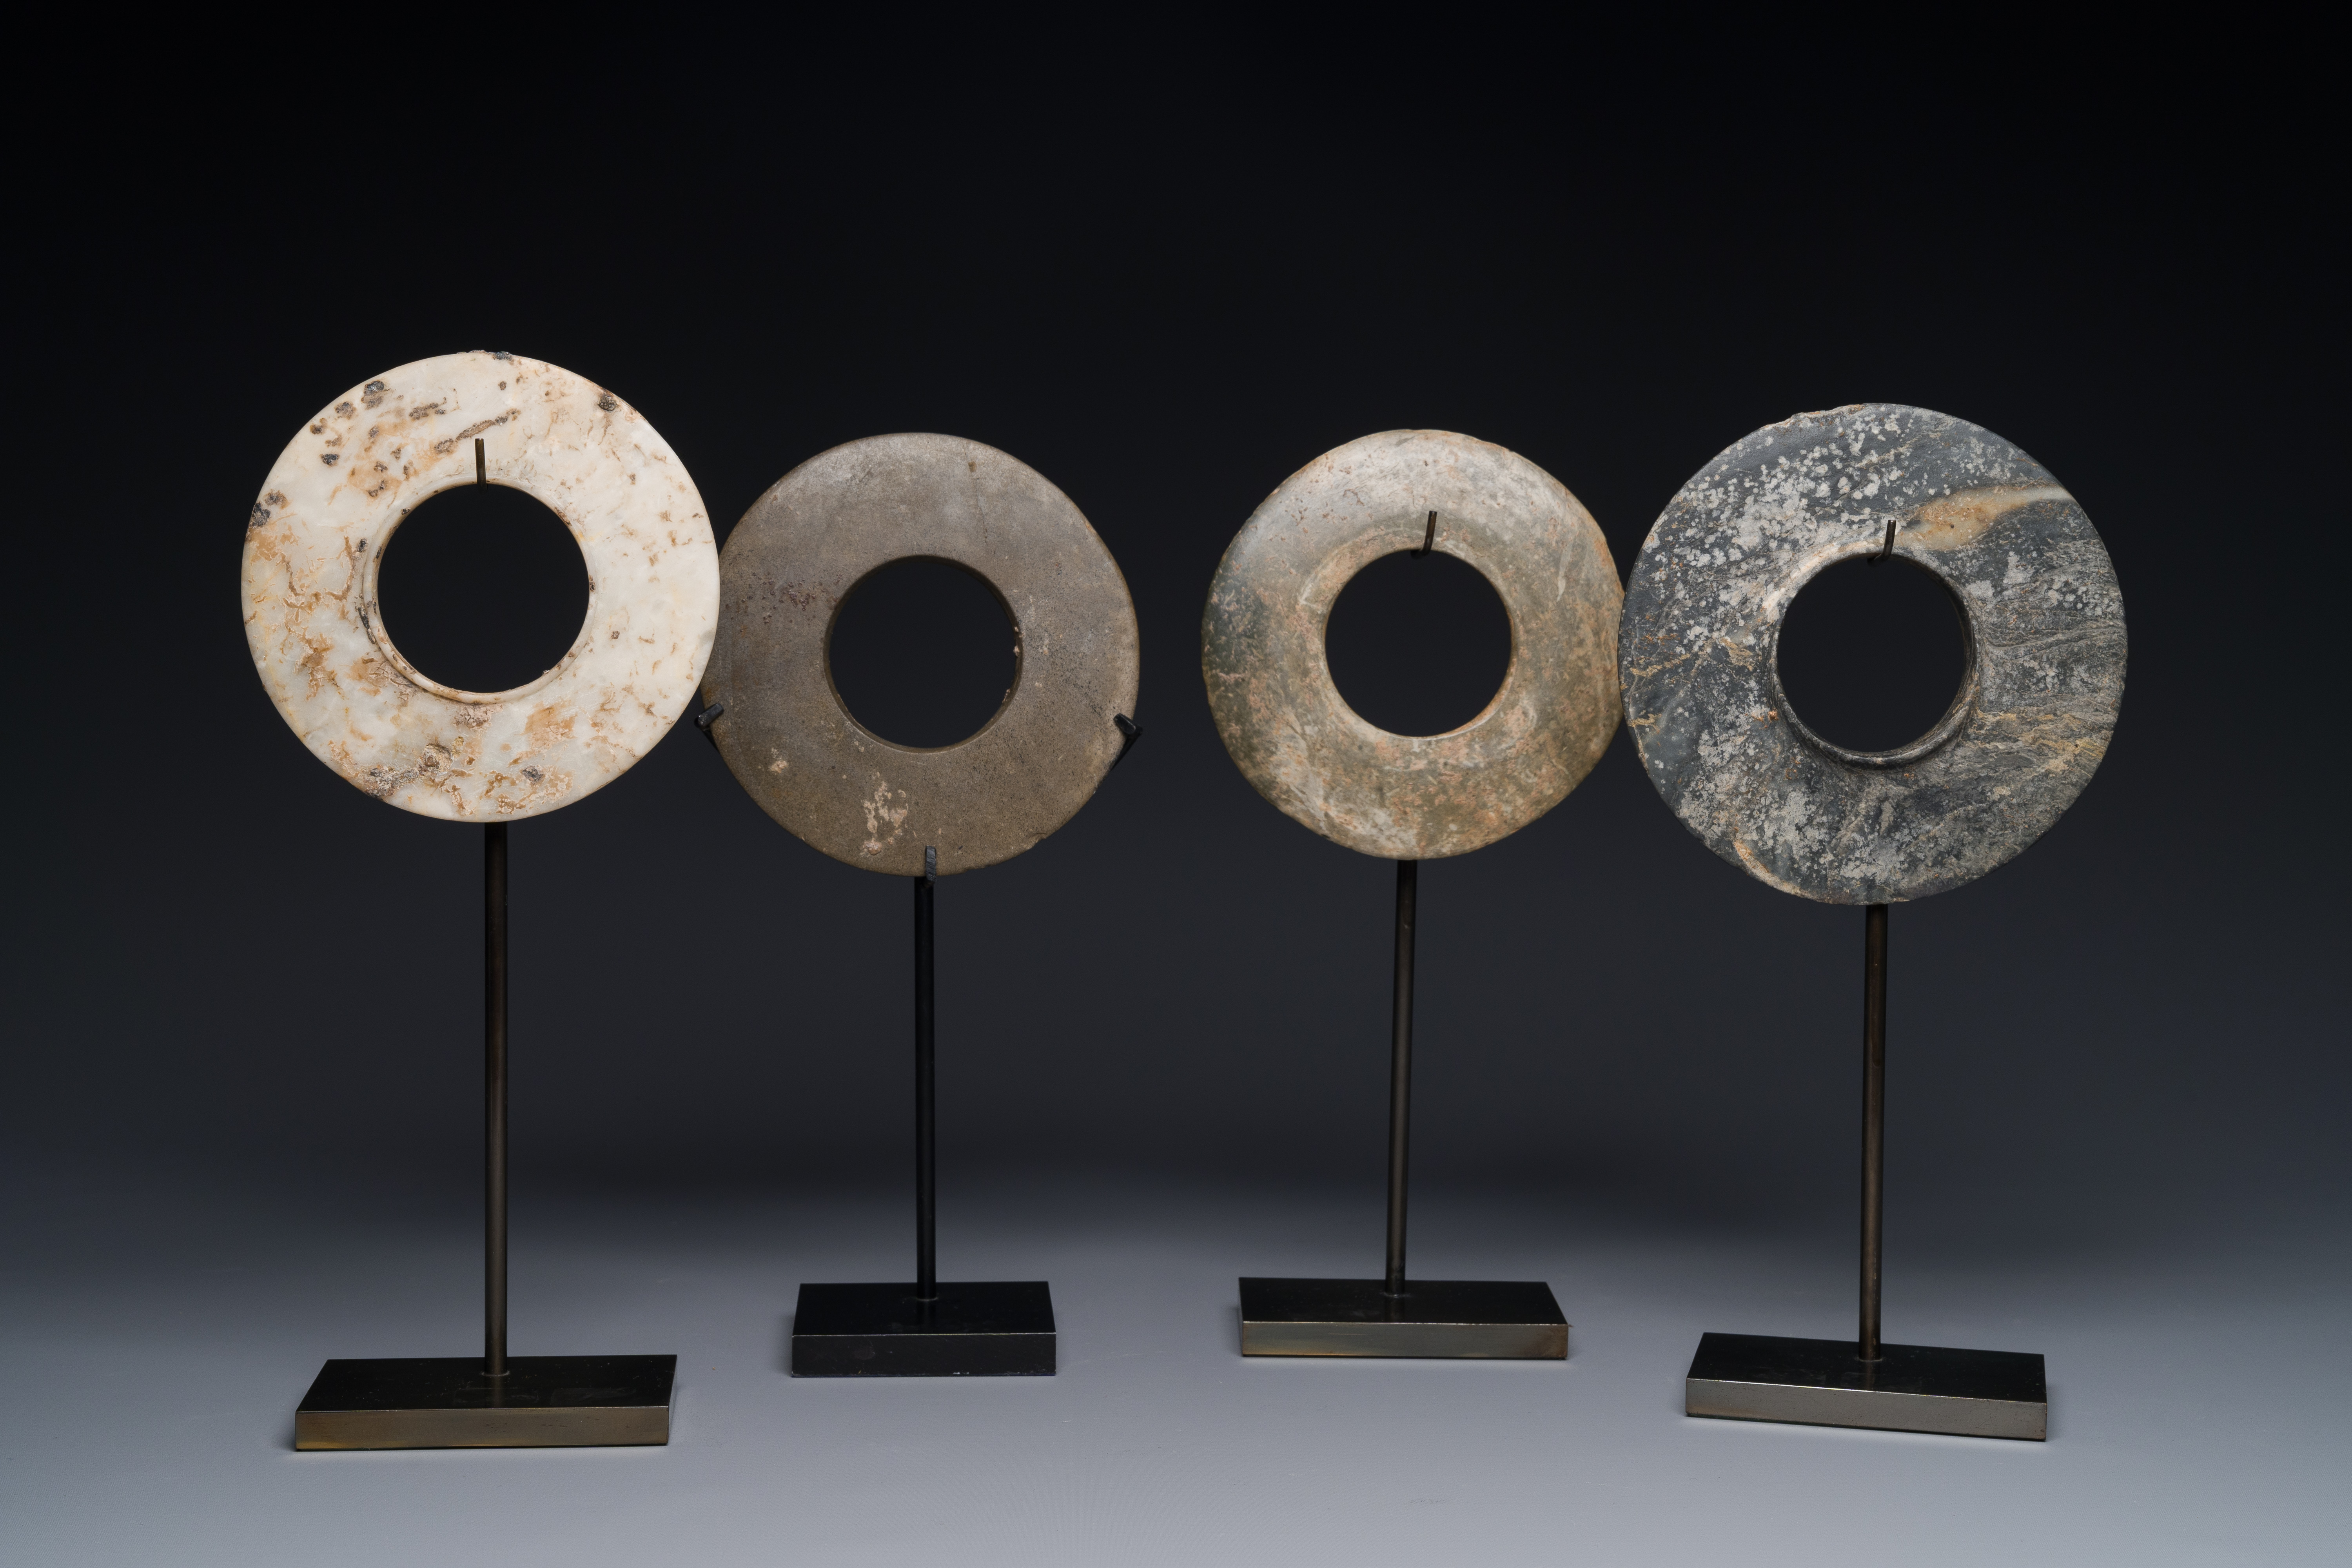 Four marble, serpentine and shell bracelets from the Thai neolithic period, Khorat plateau, 1400-500